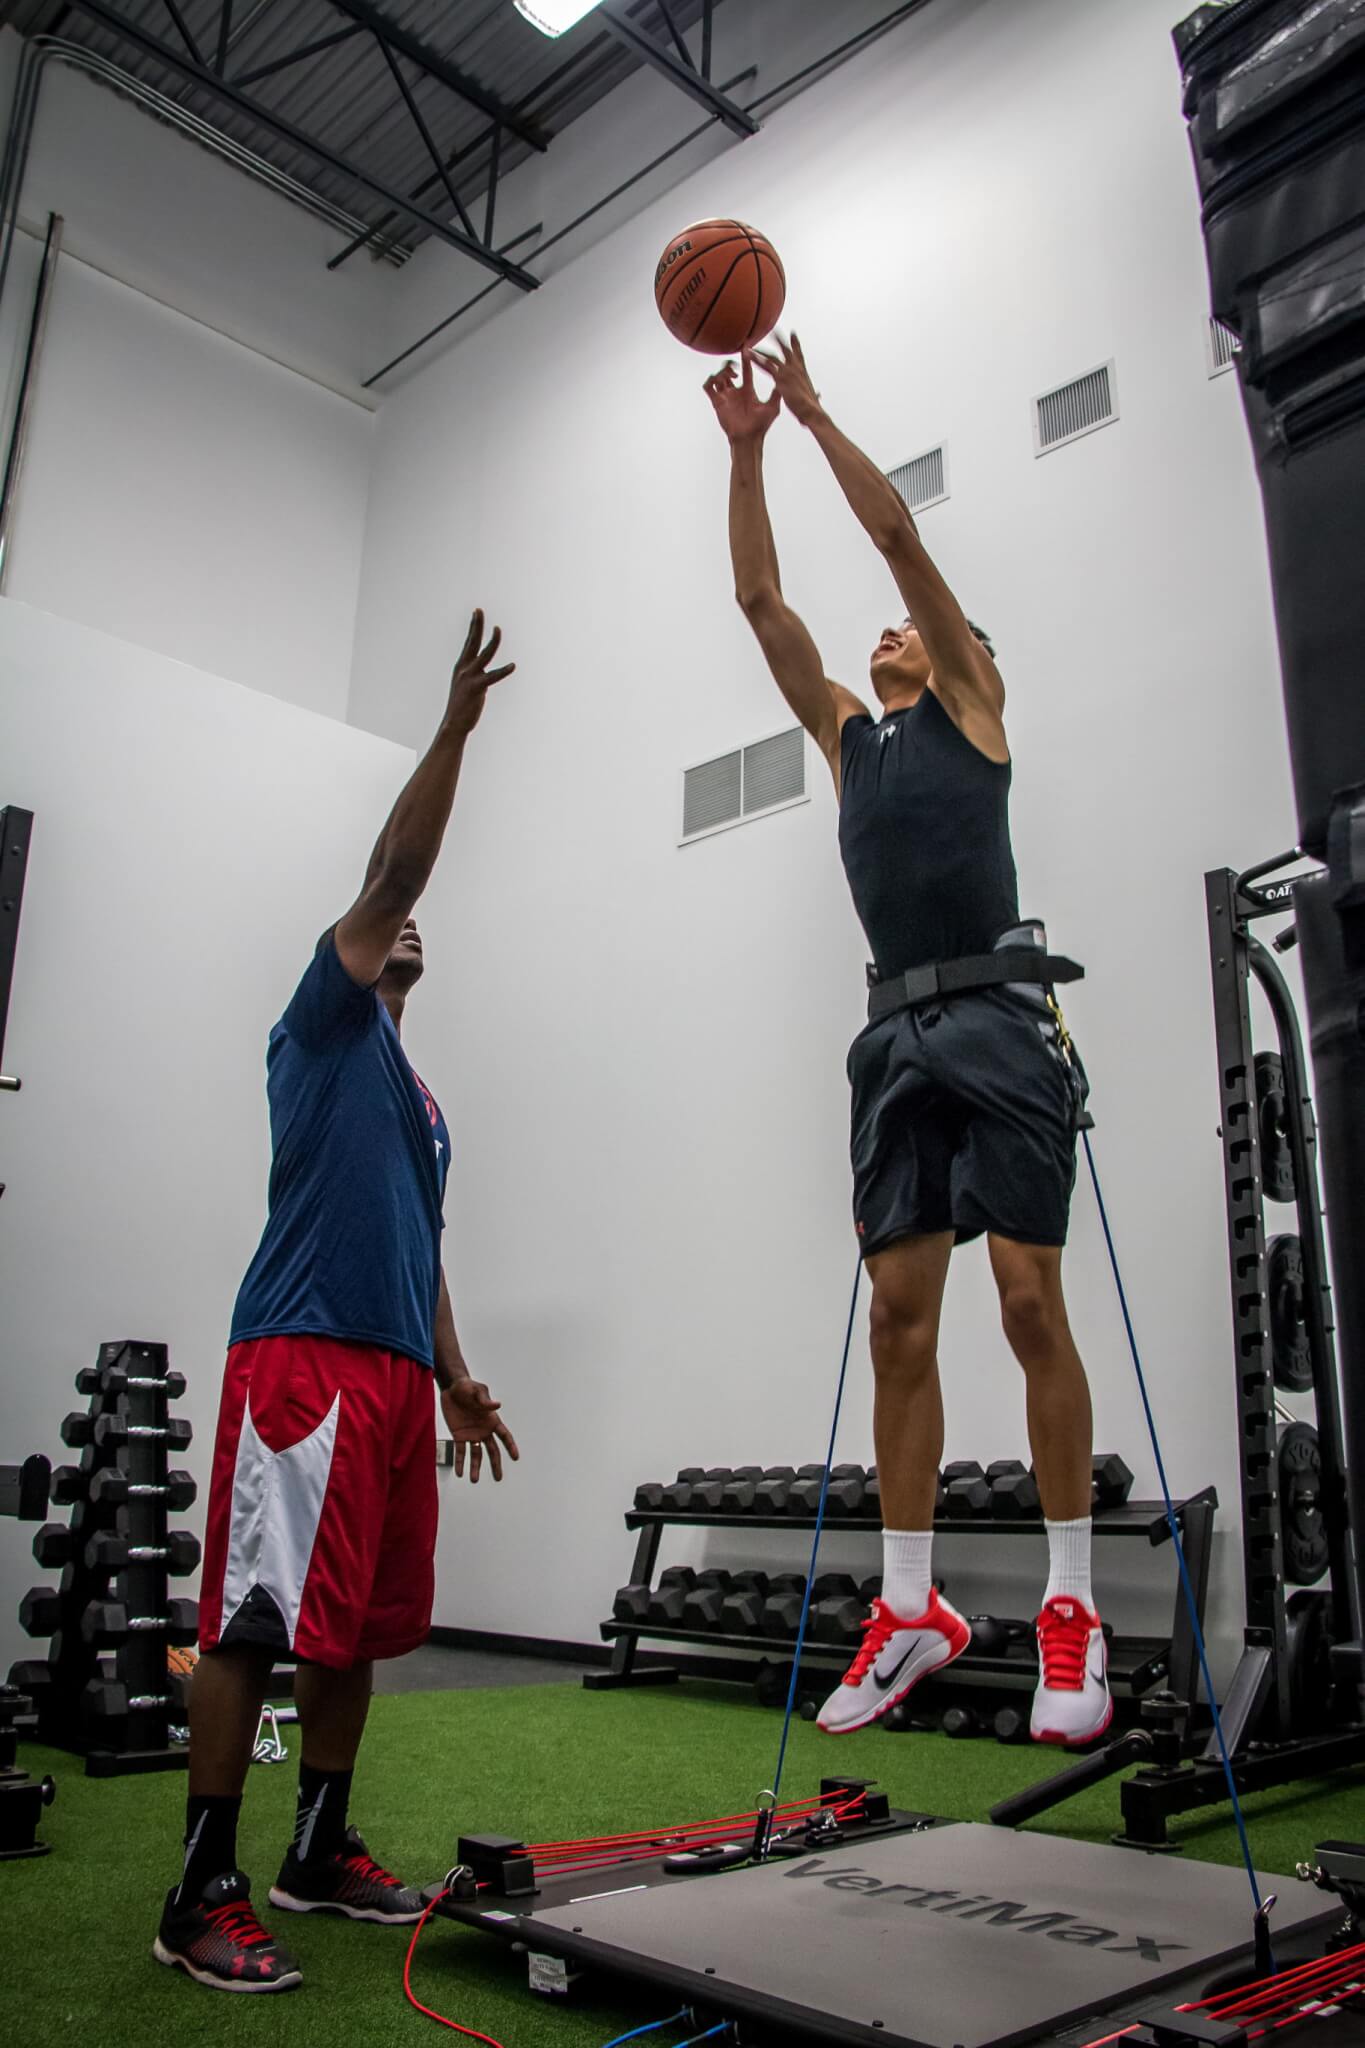 Our Programs - Basketball-Specific Strength and Conditioning (Reactive Vertimax Jump)